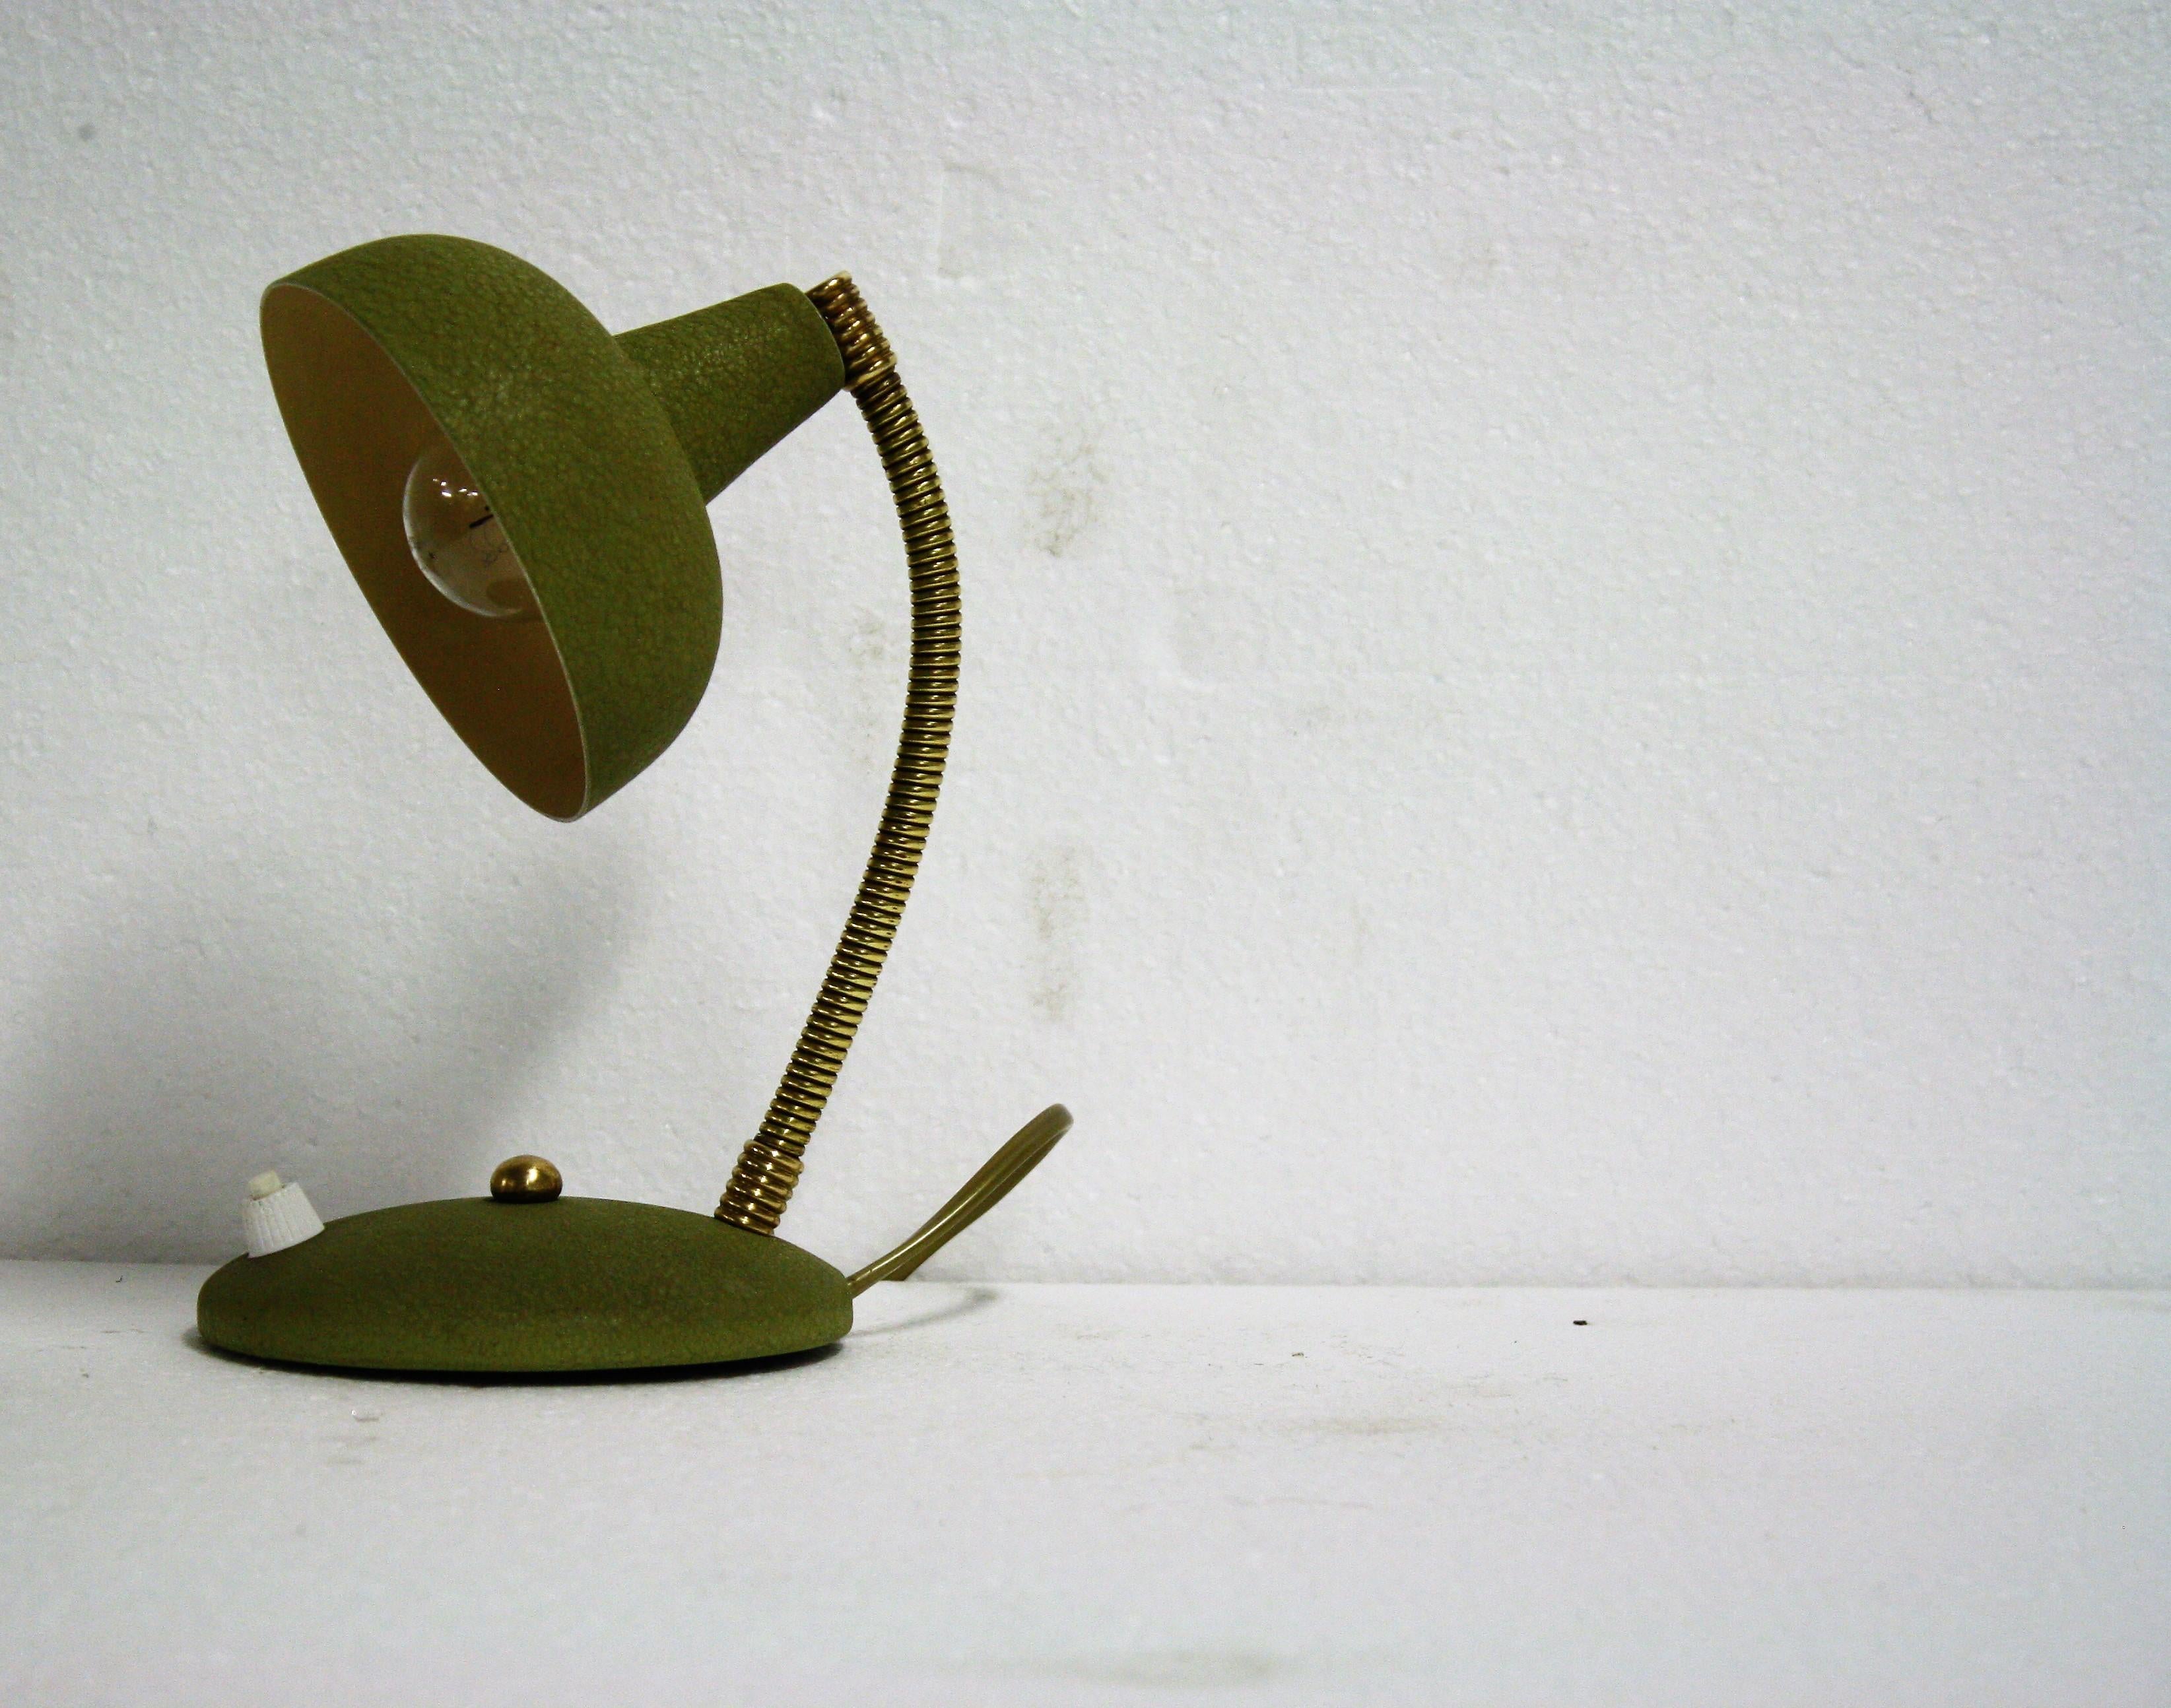 Mid-Century Modern green Italian desk lamp.

This small desk lamp consist of a flexible brass arm with an aluminum shade.

It has a fresh green color which is original from the 1950s.

Rewired, tested and ready to use with a regular E14 light